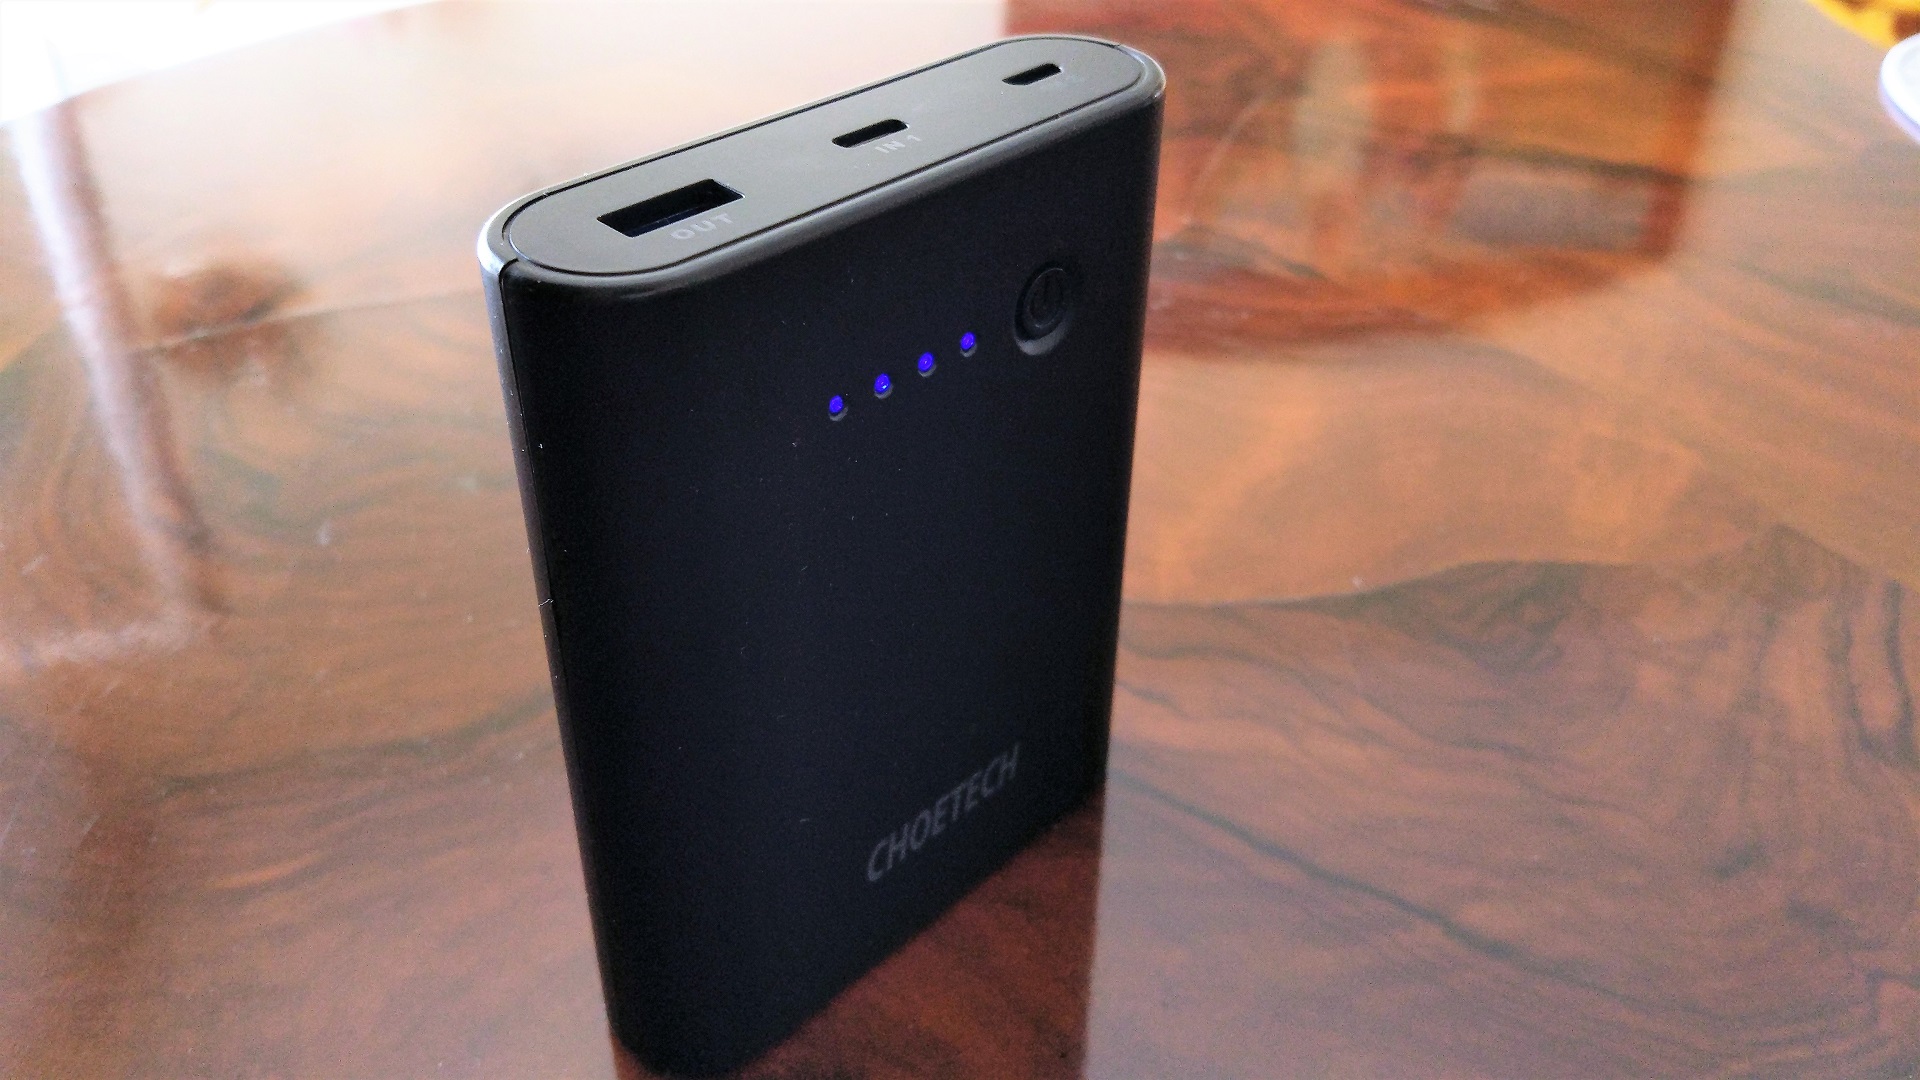 Choetech B618T power bank Quick Charge 3.0